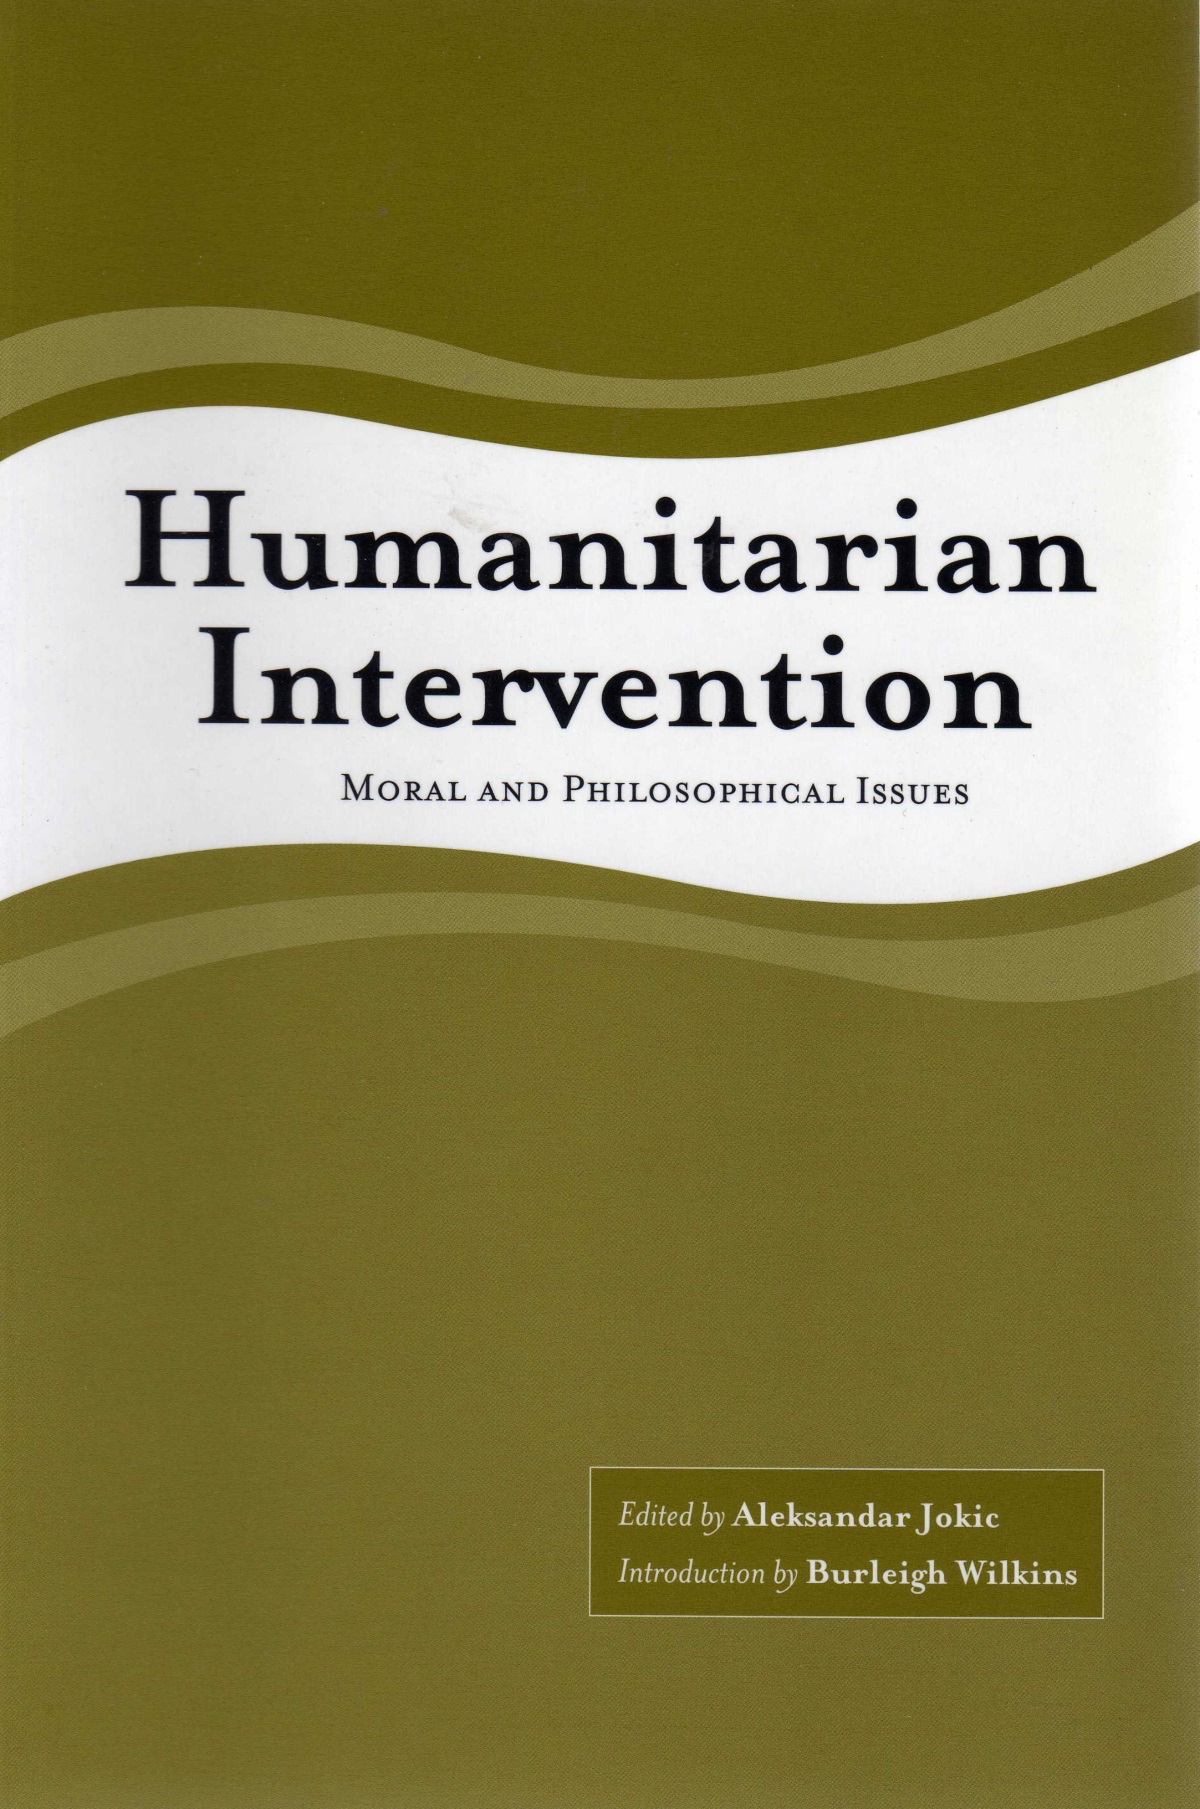 research paper on humanitarian intervention